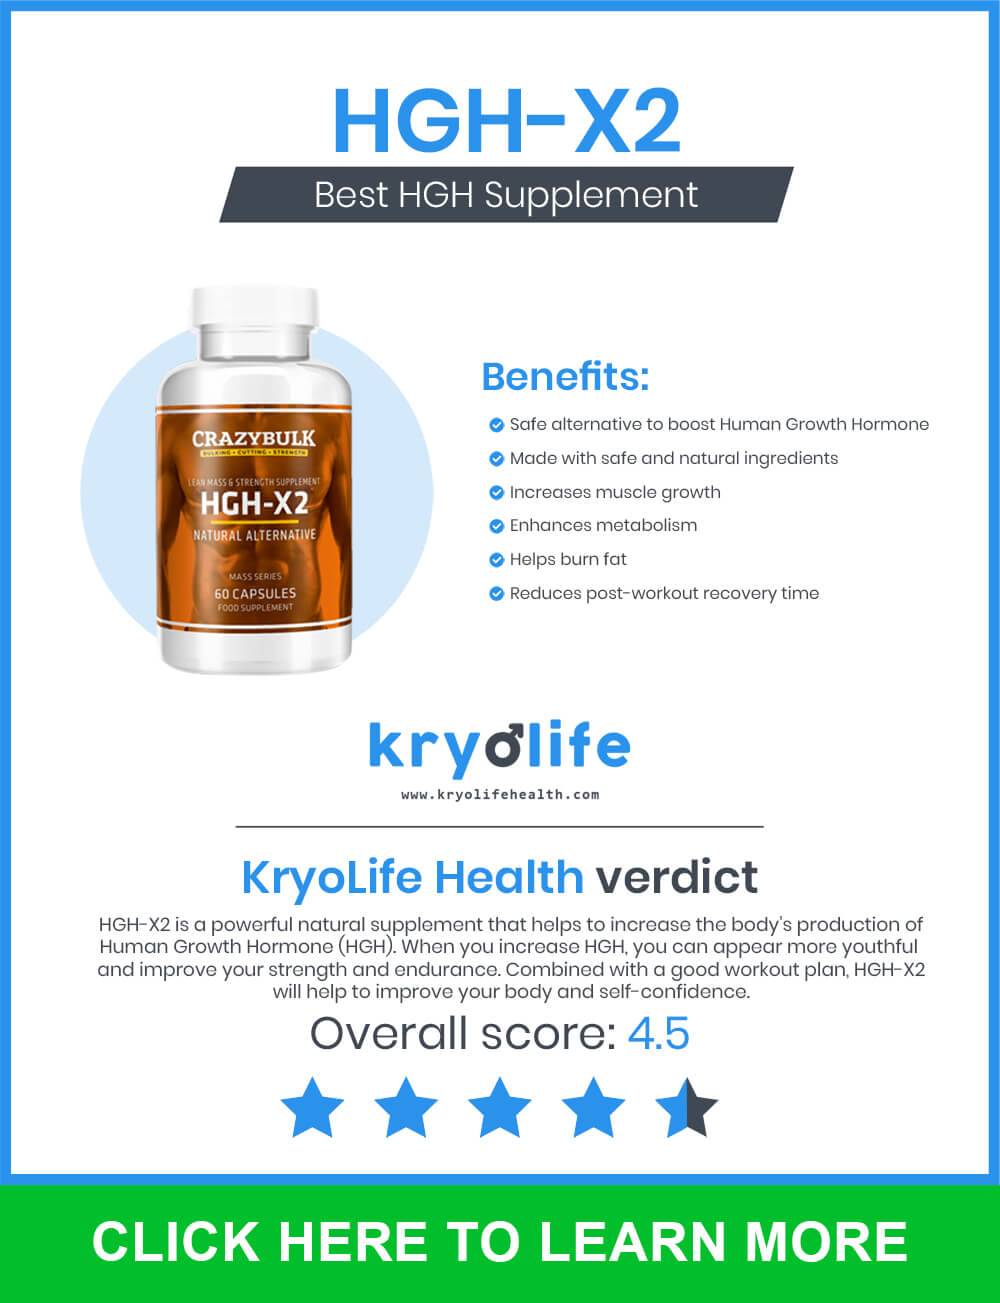 hgh-x2 infographic